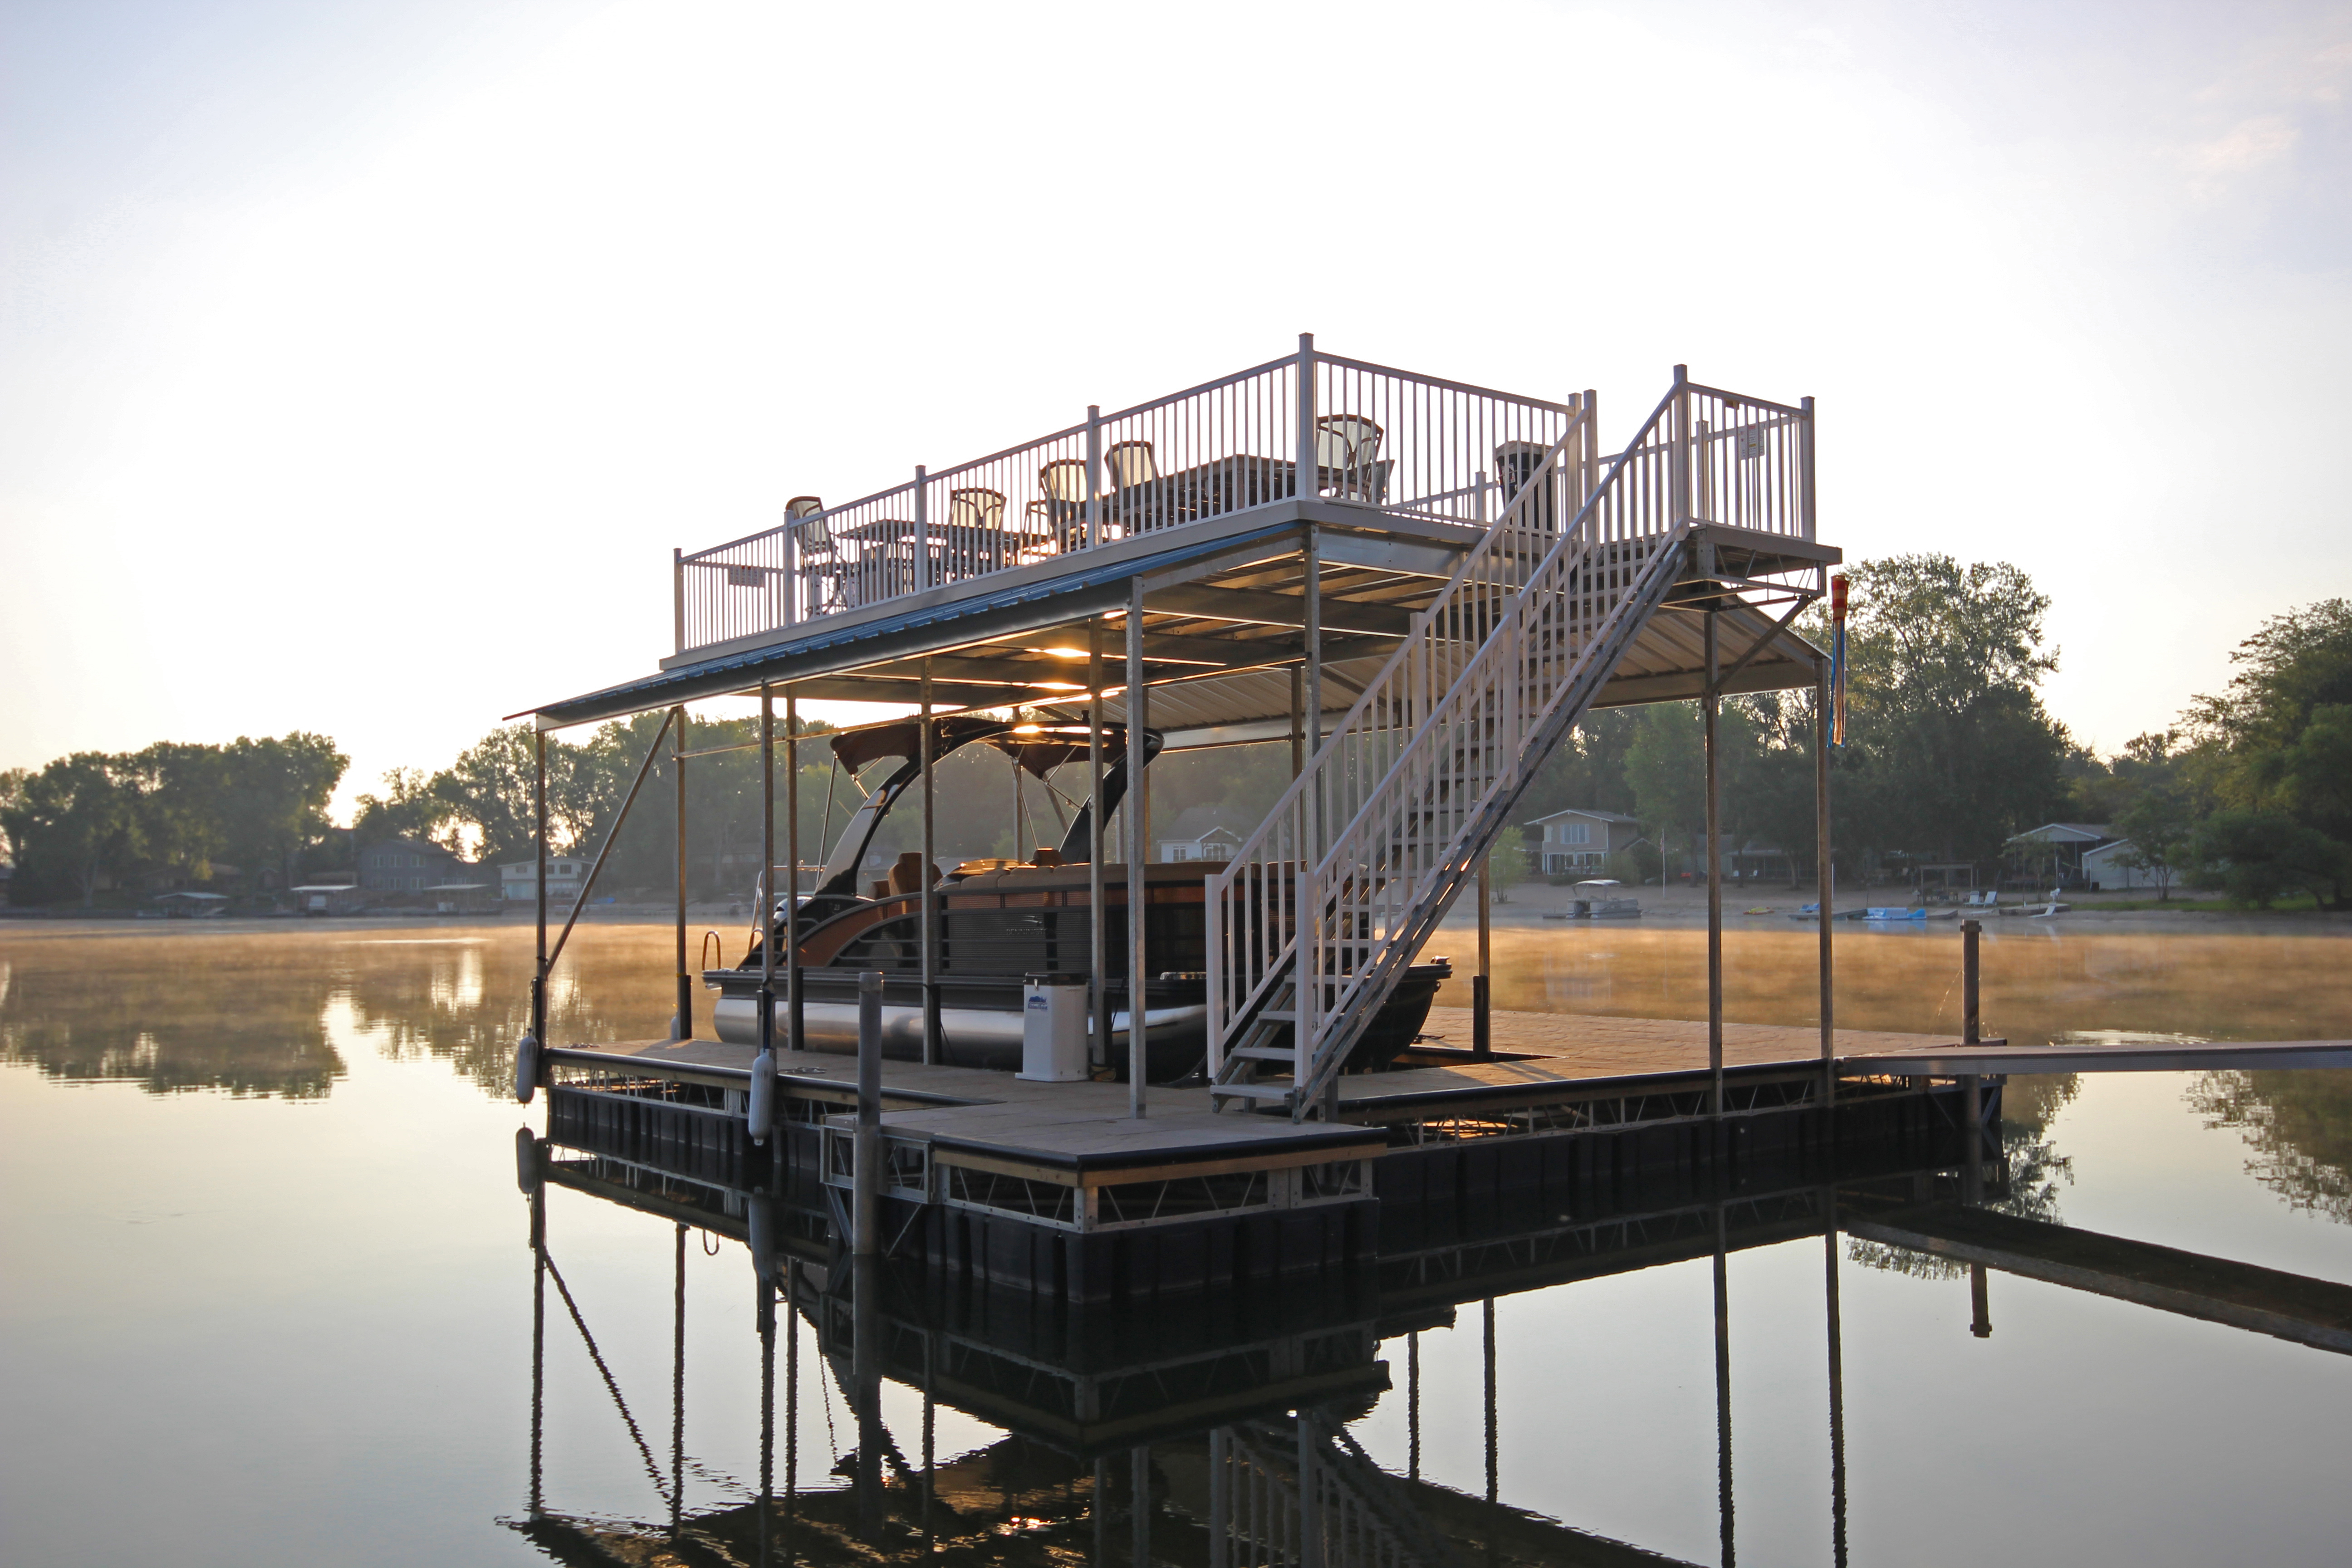 Double Decker Docks: Enhance Your Floating Dock with Double Decker Features